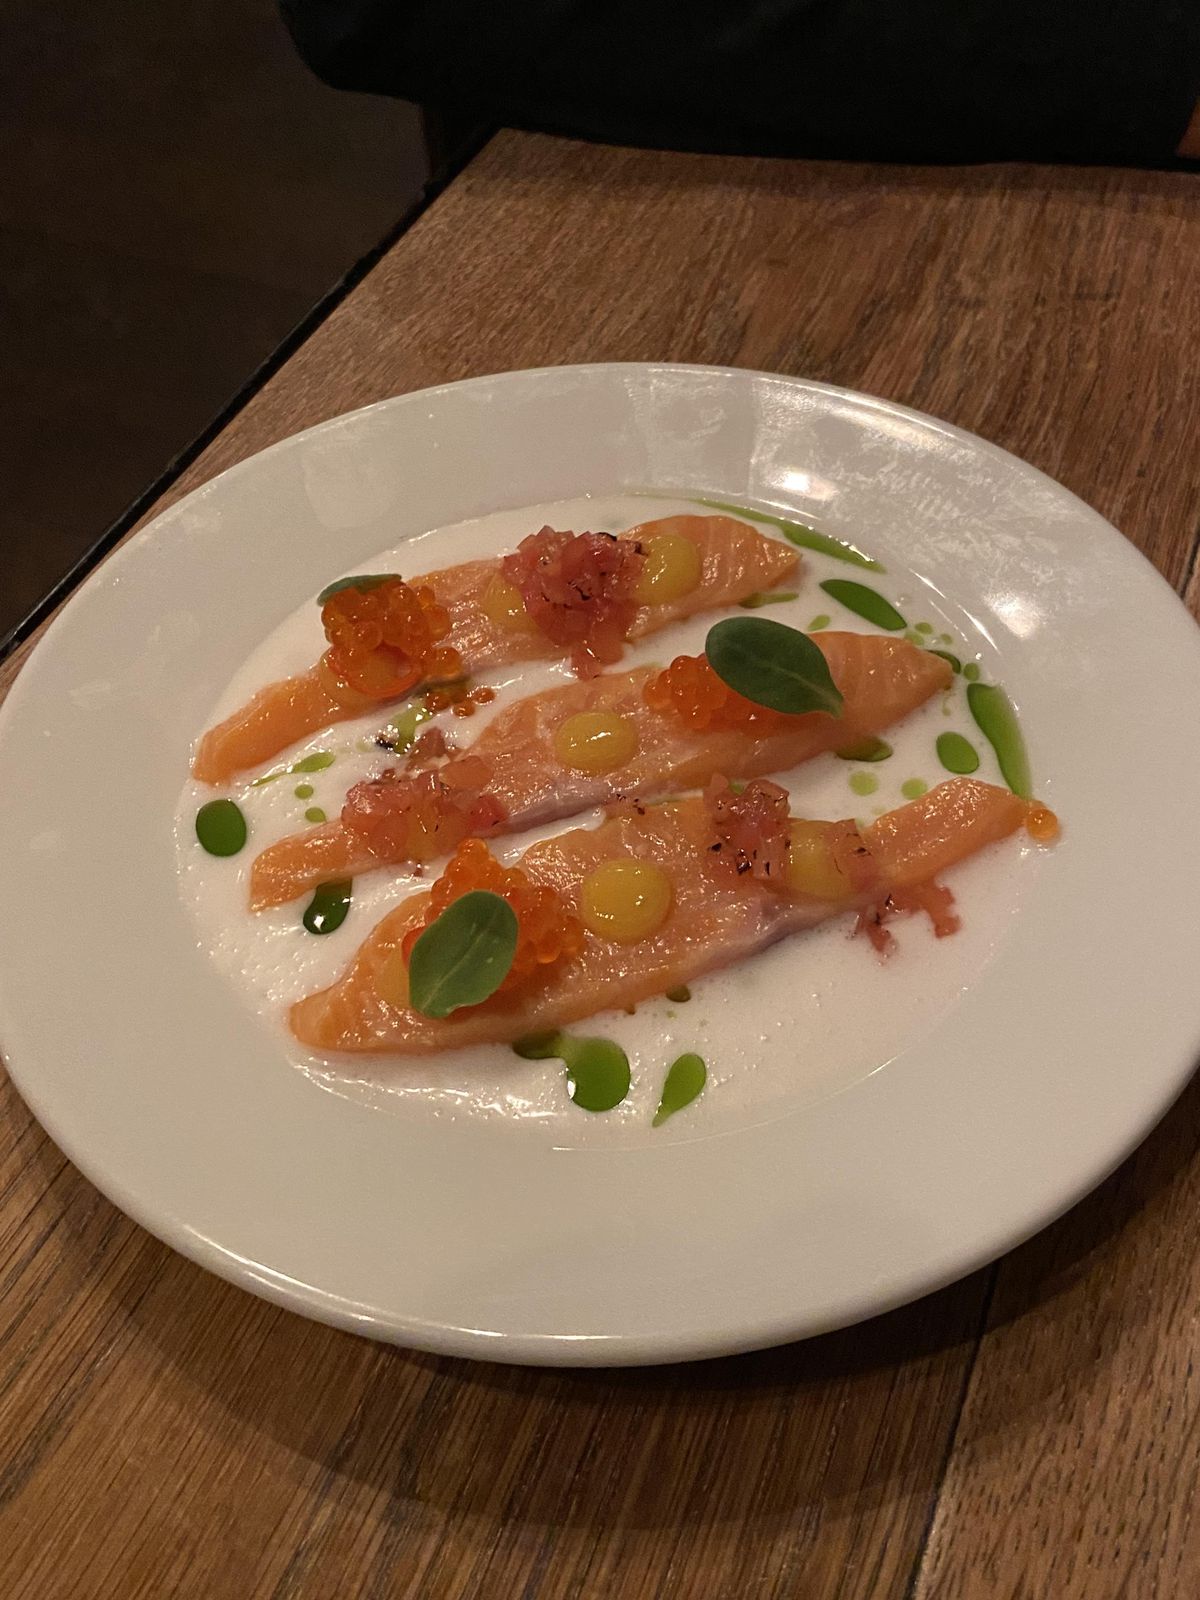 Three thick slices of cured trout on a white plate, with coconut sauce, a herb oil, and trout roe